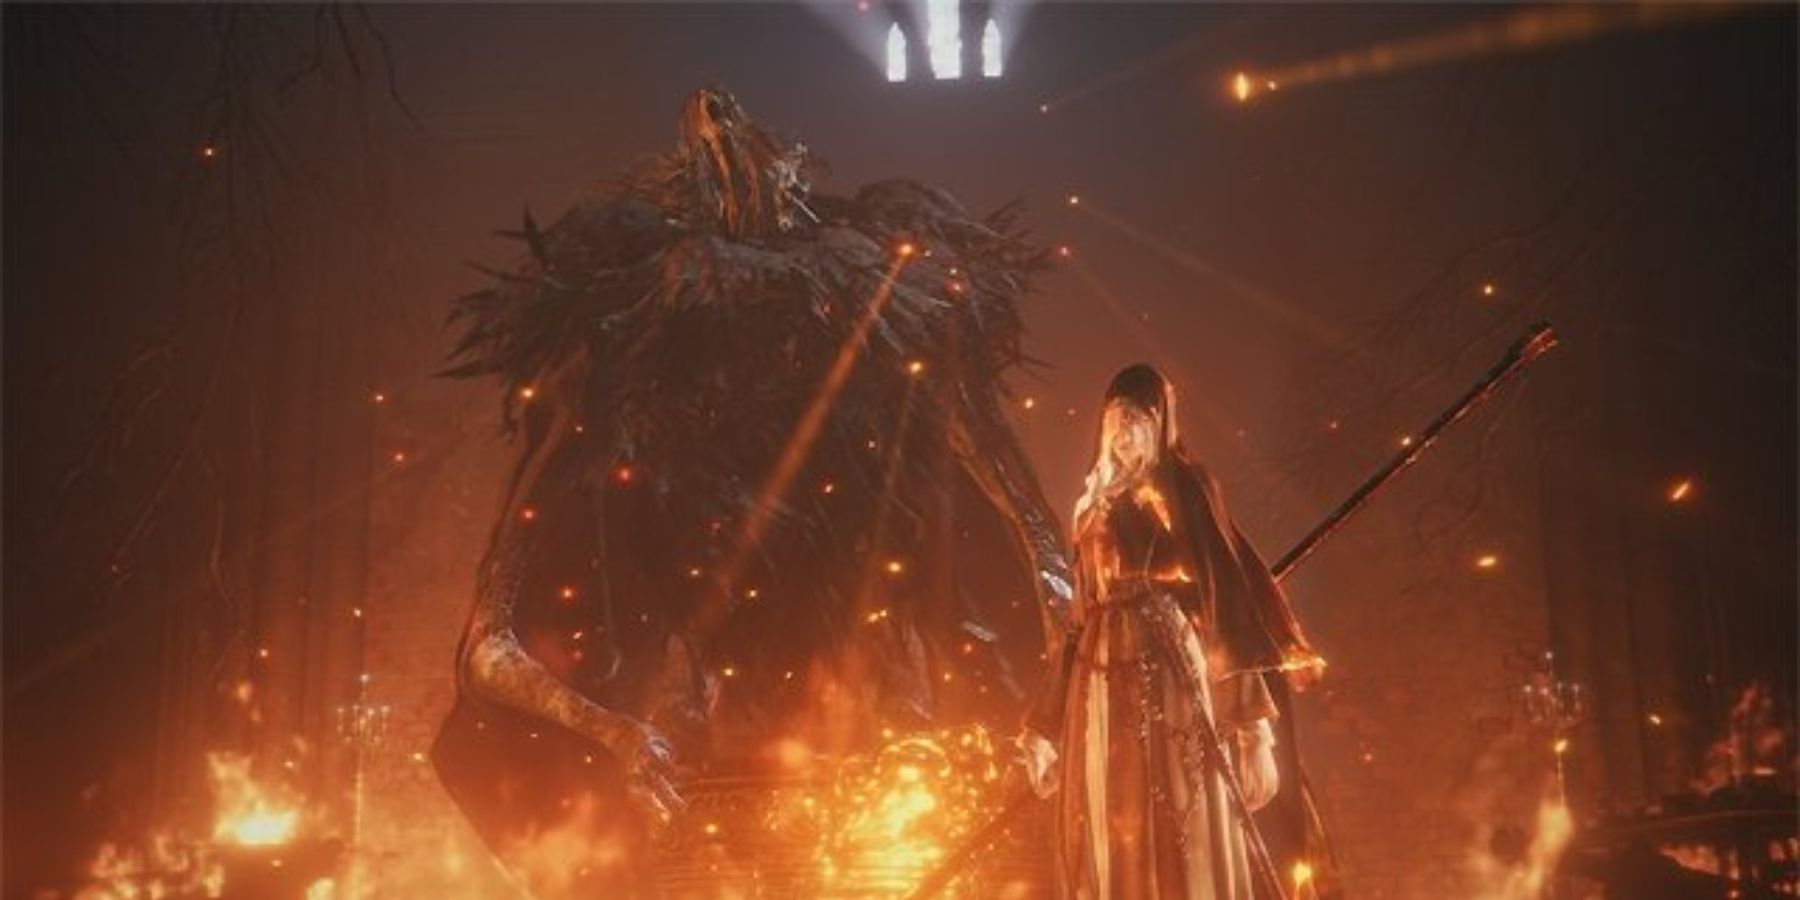 Sister Freide and Father Ariandel from Dark Souls 3's DLC.